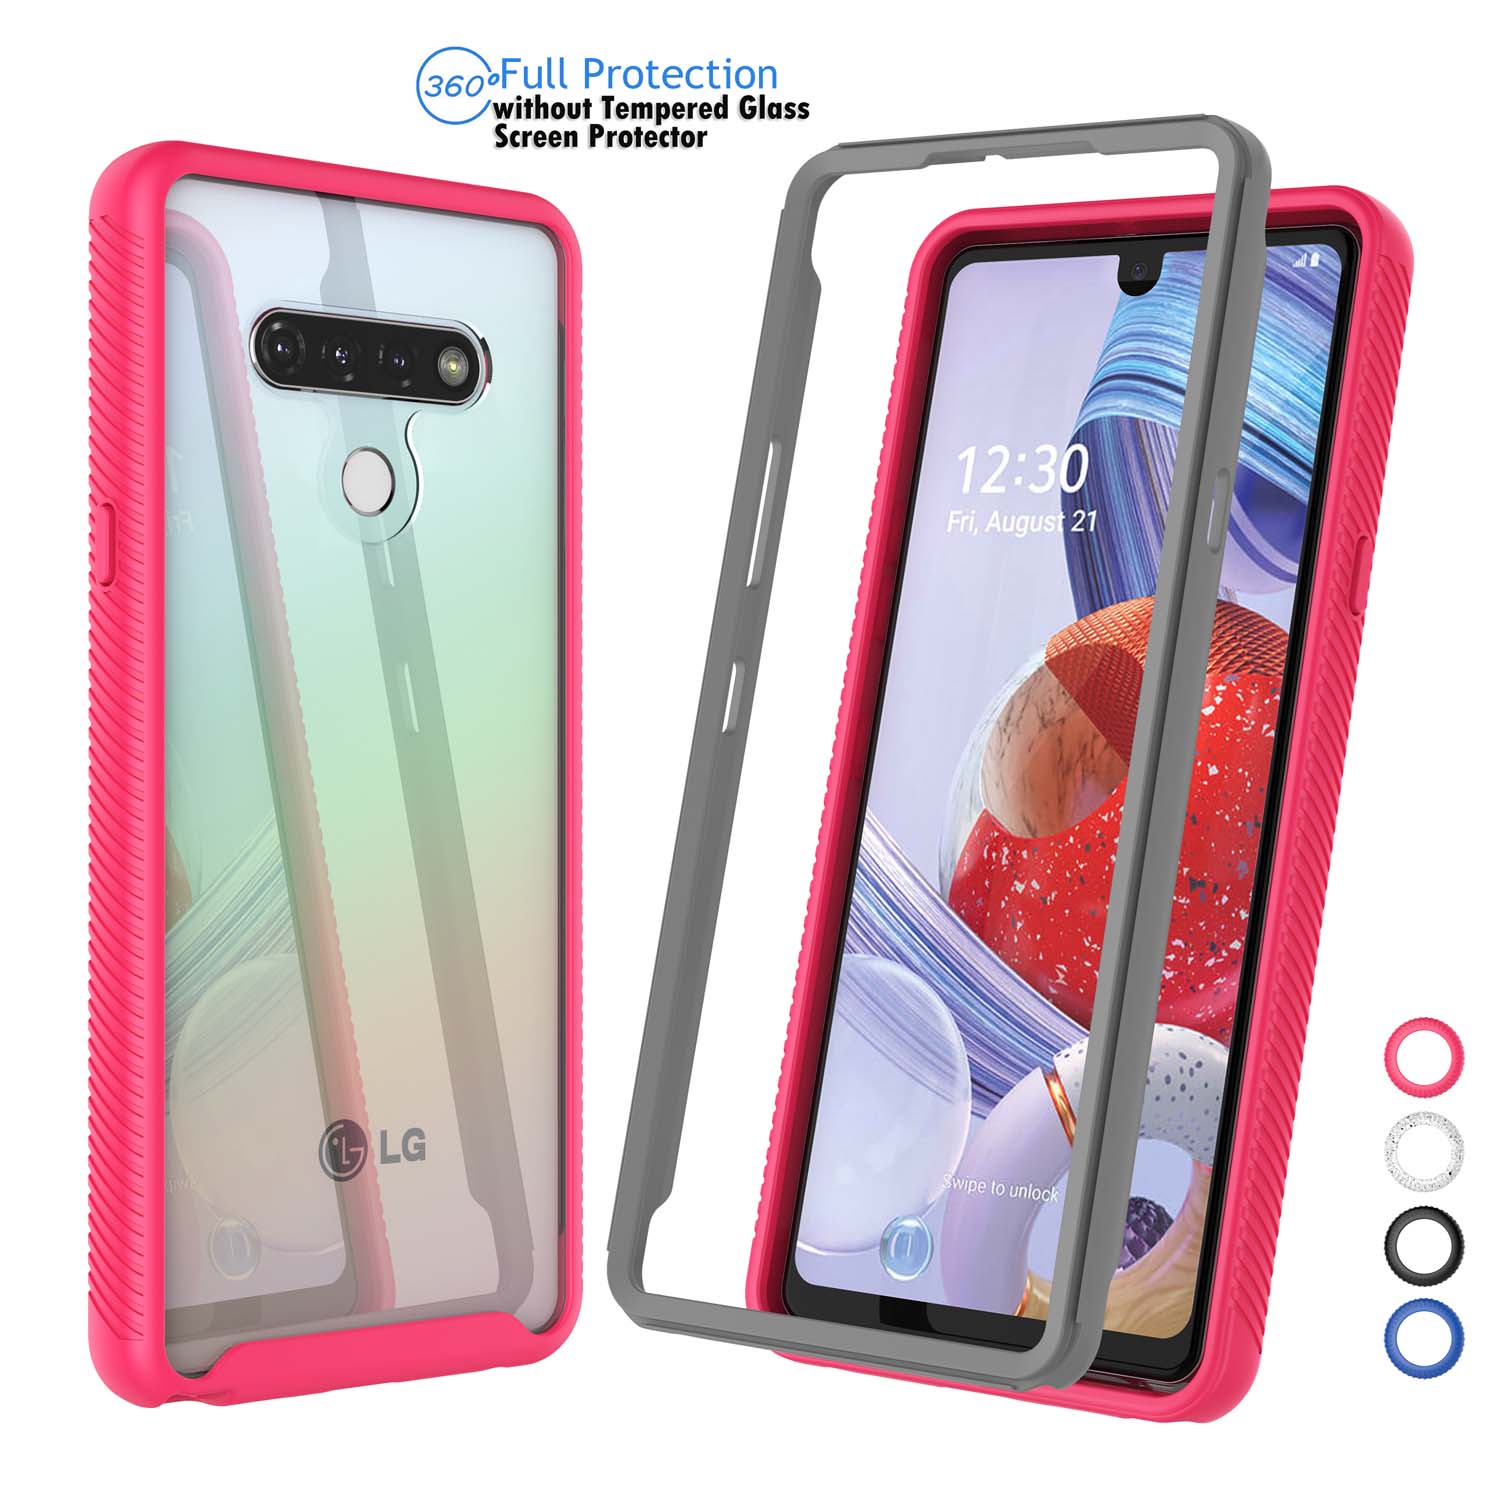 LG Stylo 6 Case, Sturdy Case for 2020 LG Stylo 6, Njjex Full-Body Rugged Transparent Clear Back Bumper Case Cover for LG Stylo 6 6.8" 2020 Not LG Stylo 5 6.2" -Hot Pink - image 1 of 10